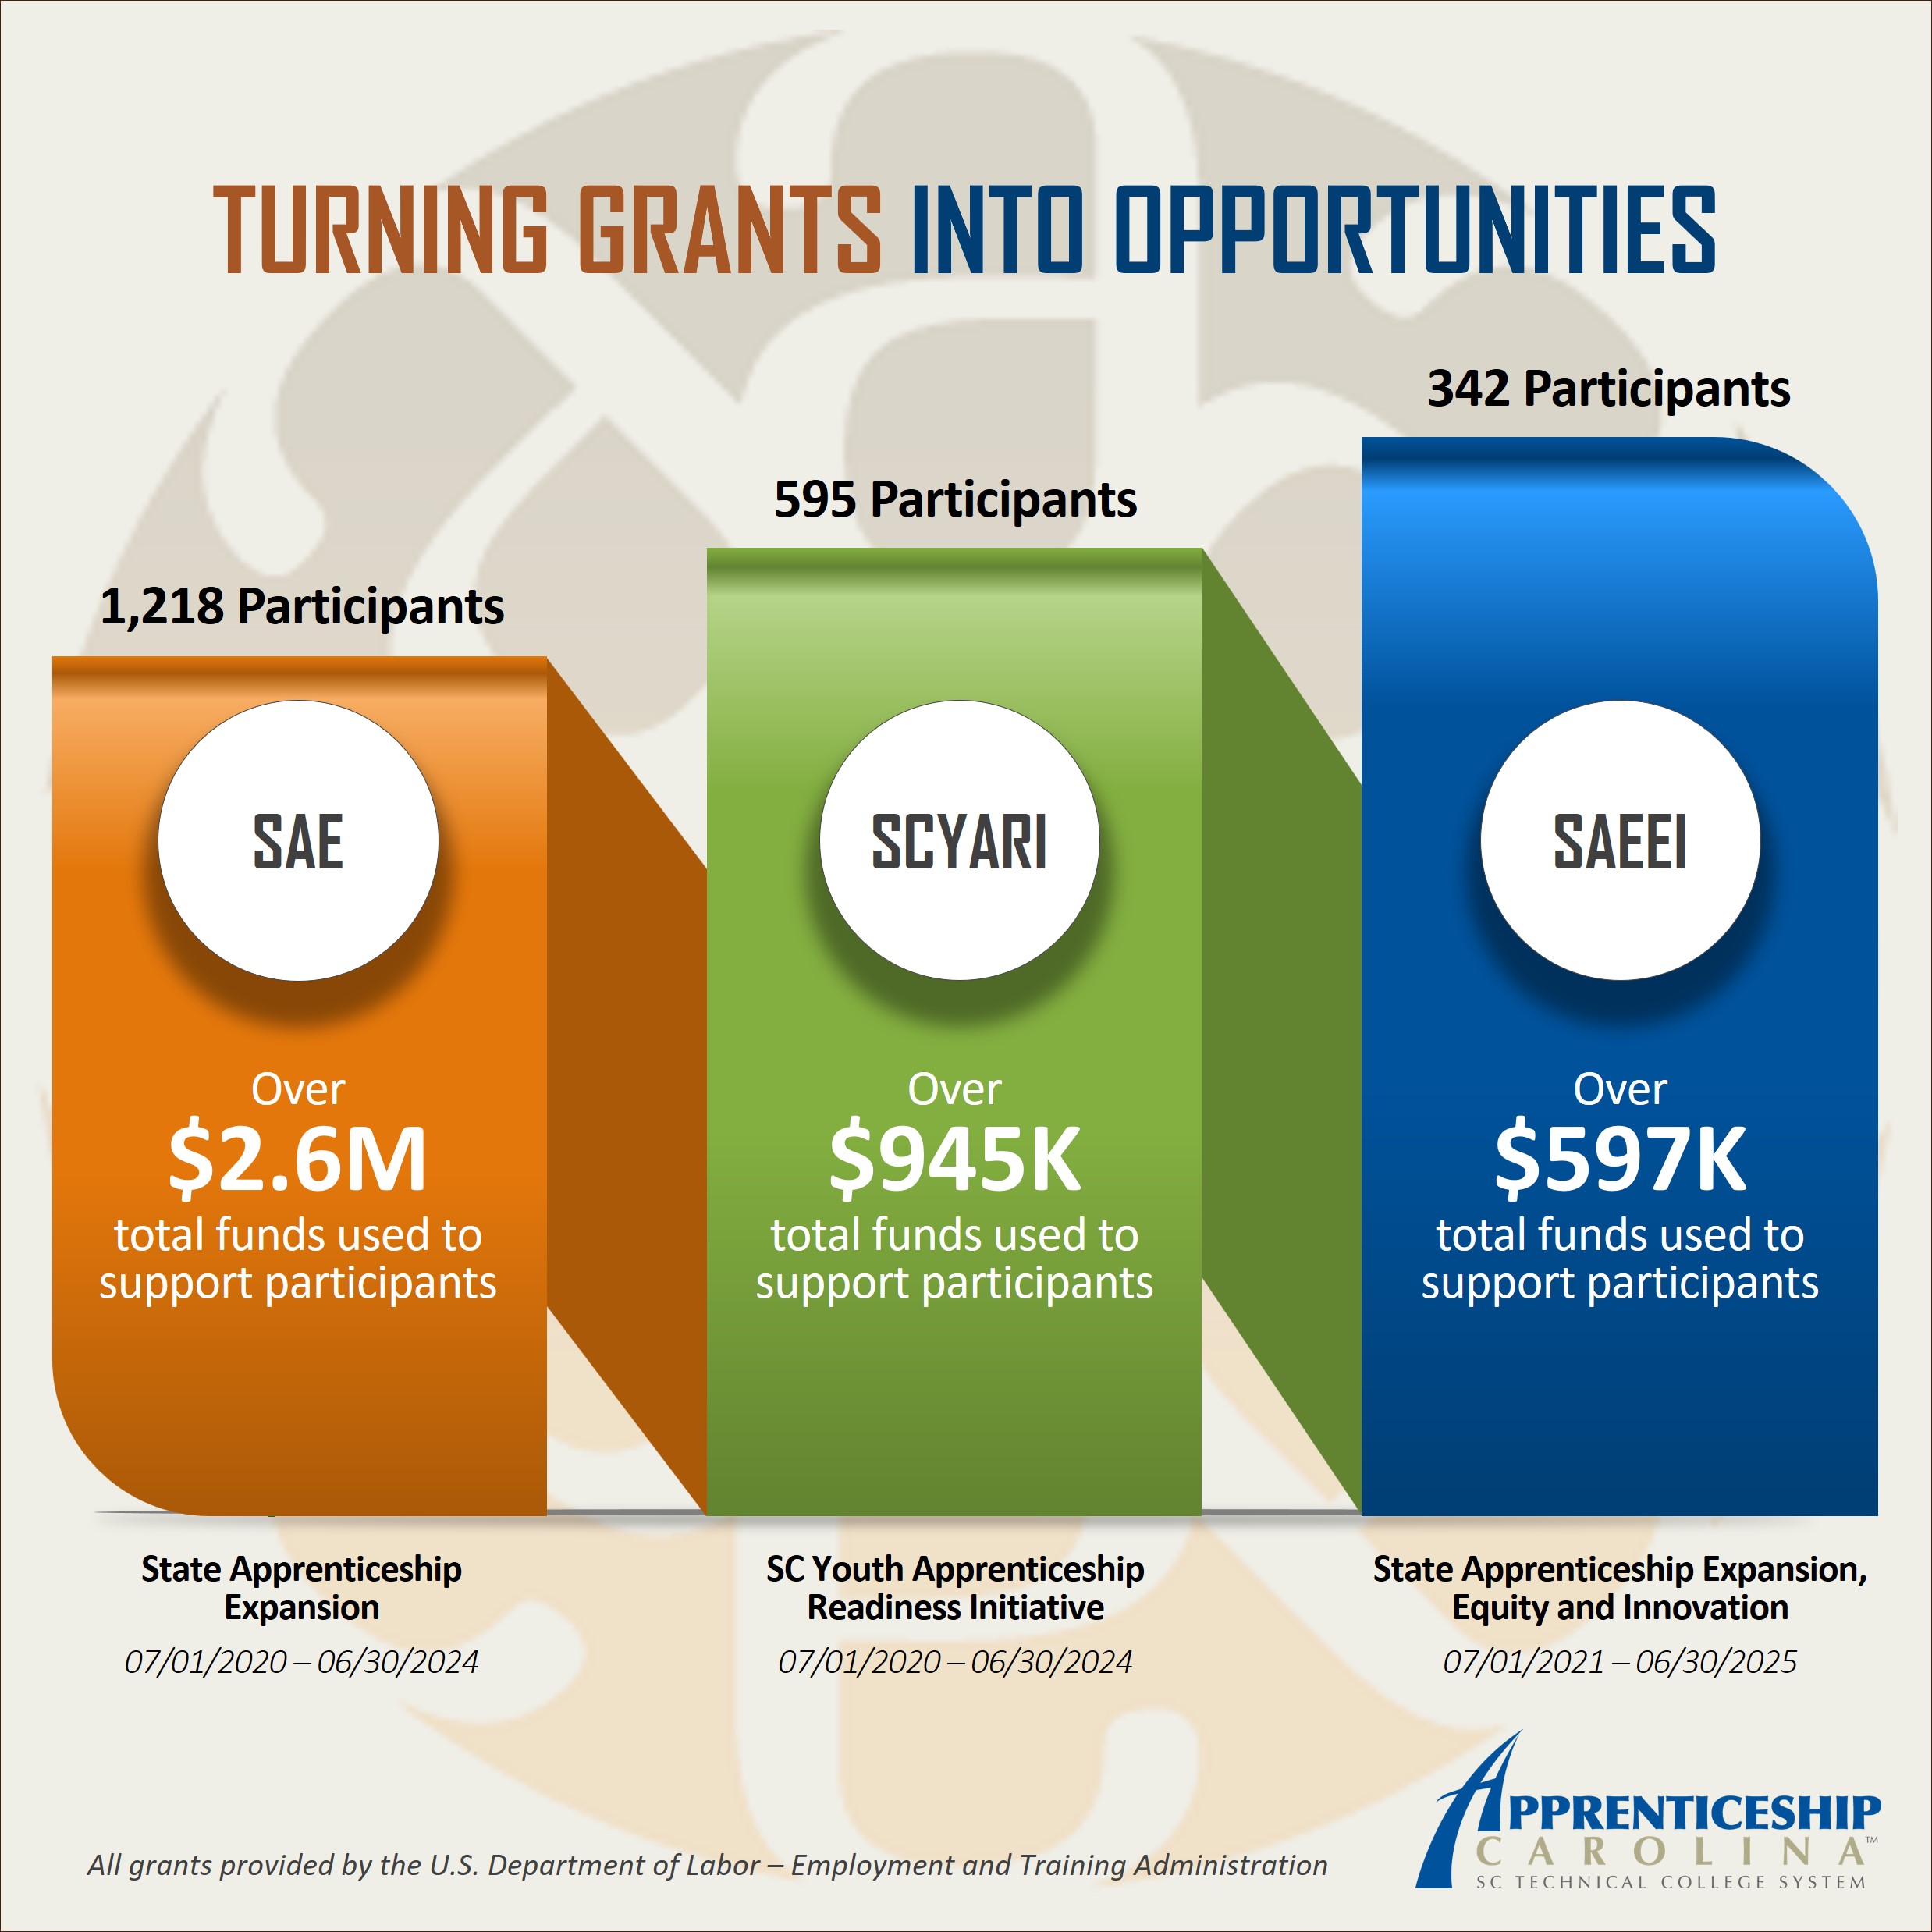 Apprenticeship Carolina has several federally funded grants that can help turn your company’s workforce goals into reality. We’ve supported thousands of South Carolinians with more than $4M in grant funding.  chart of grants